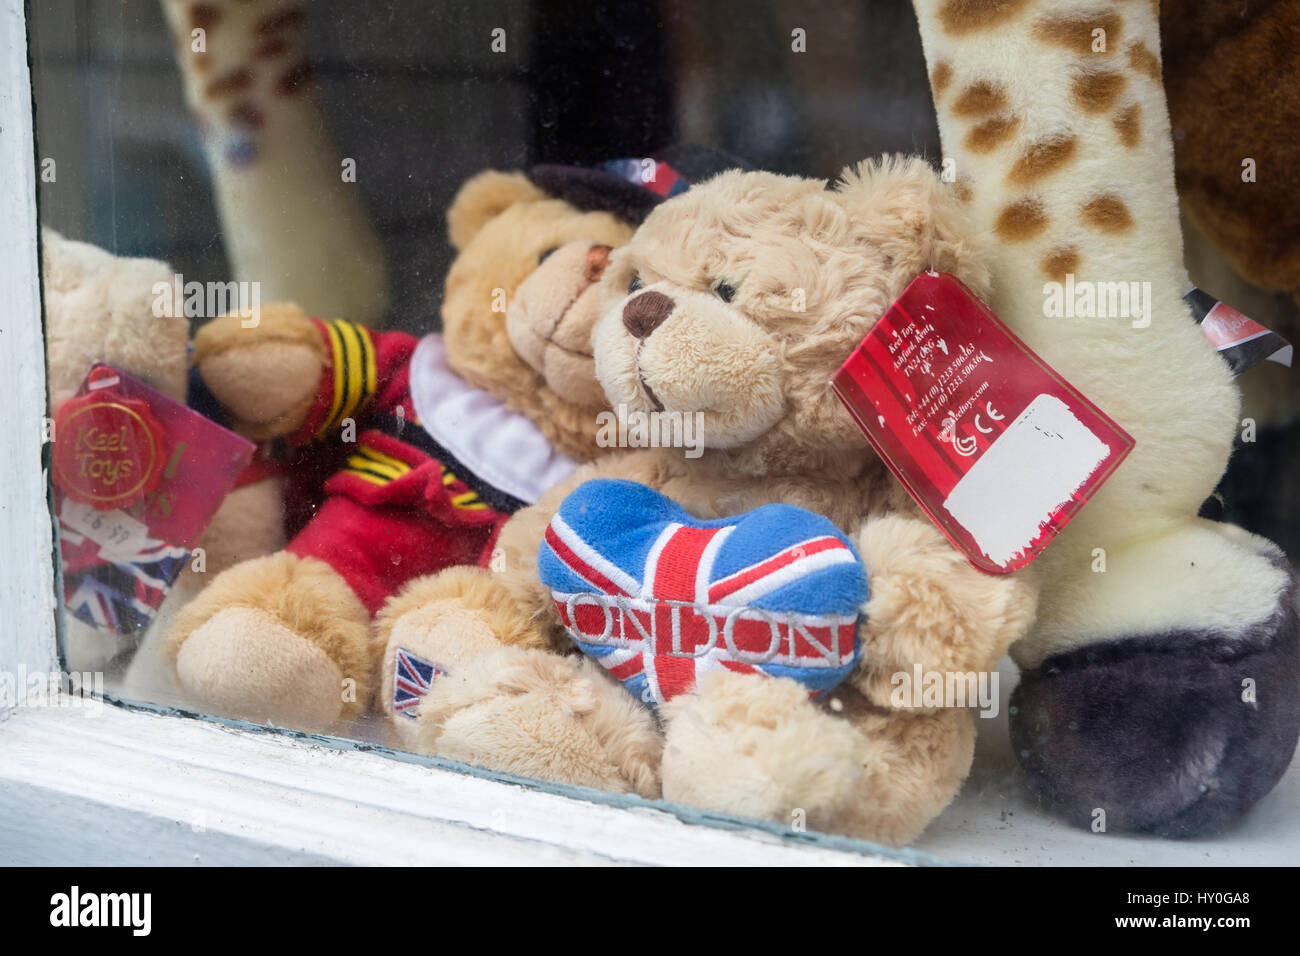 WINDSOR, UK - MARCH 18, 2017: Teddy bears in a souvenir shop window in the popular tourist town on Windsor in March 2017. Stock Photo